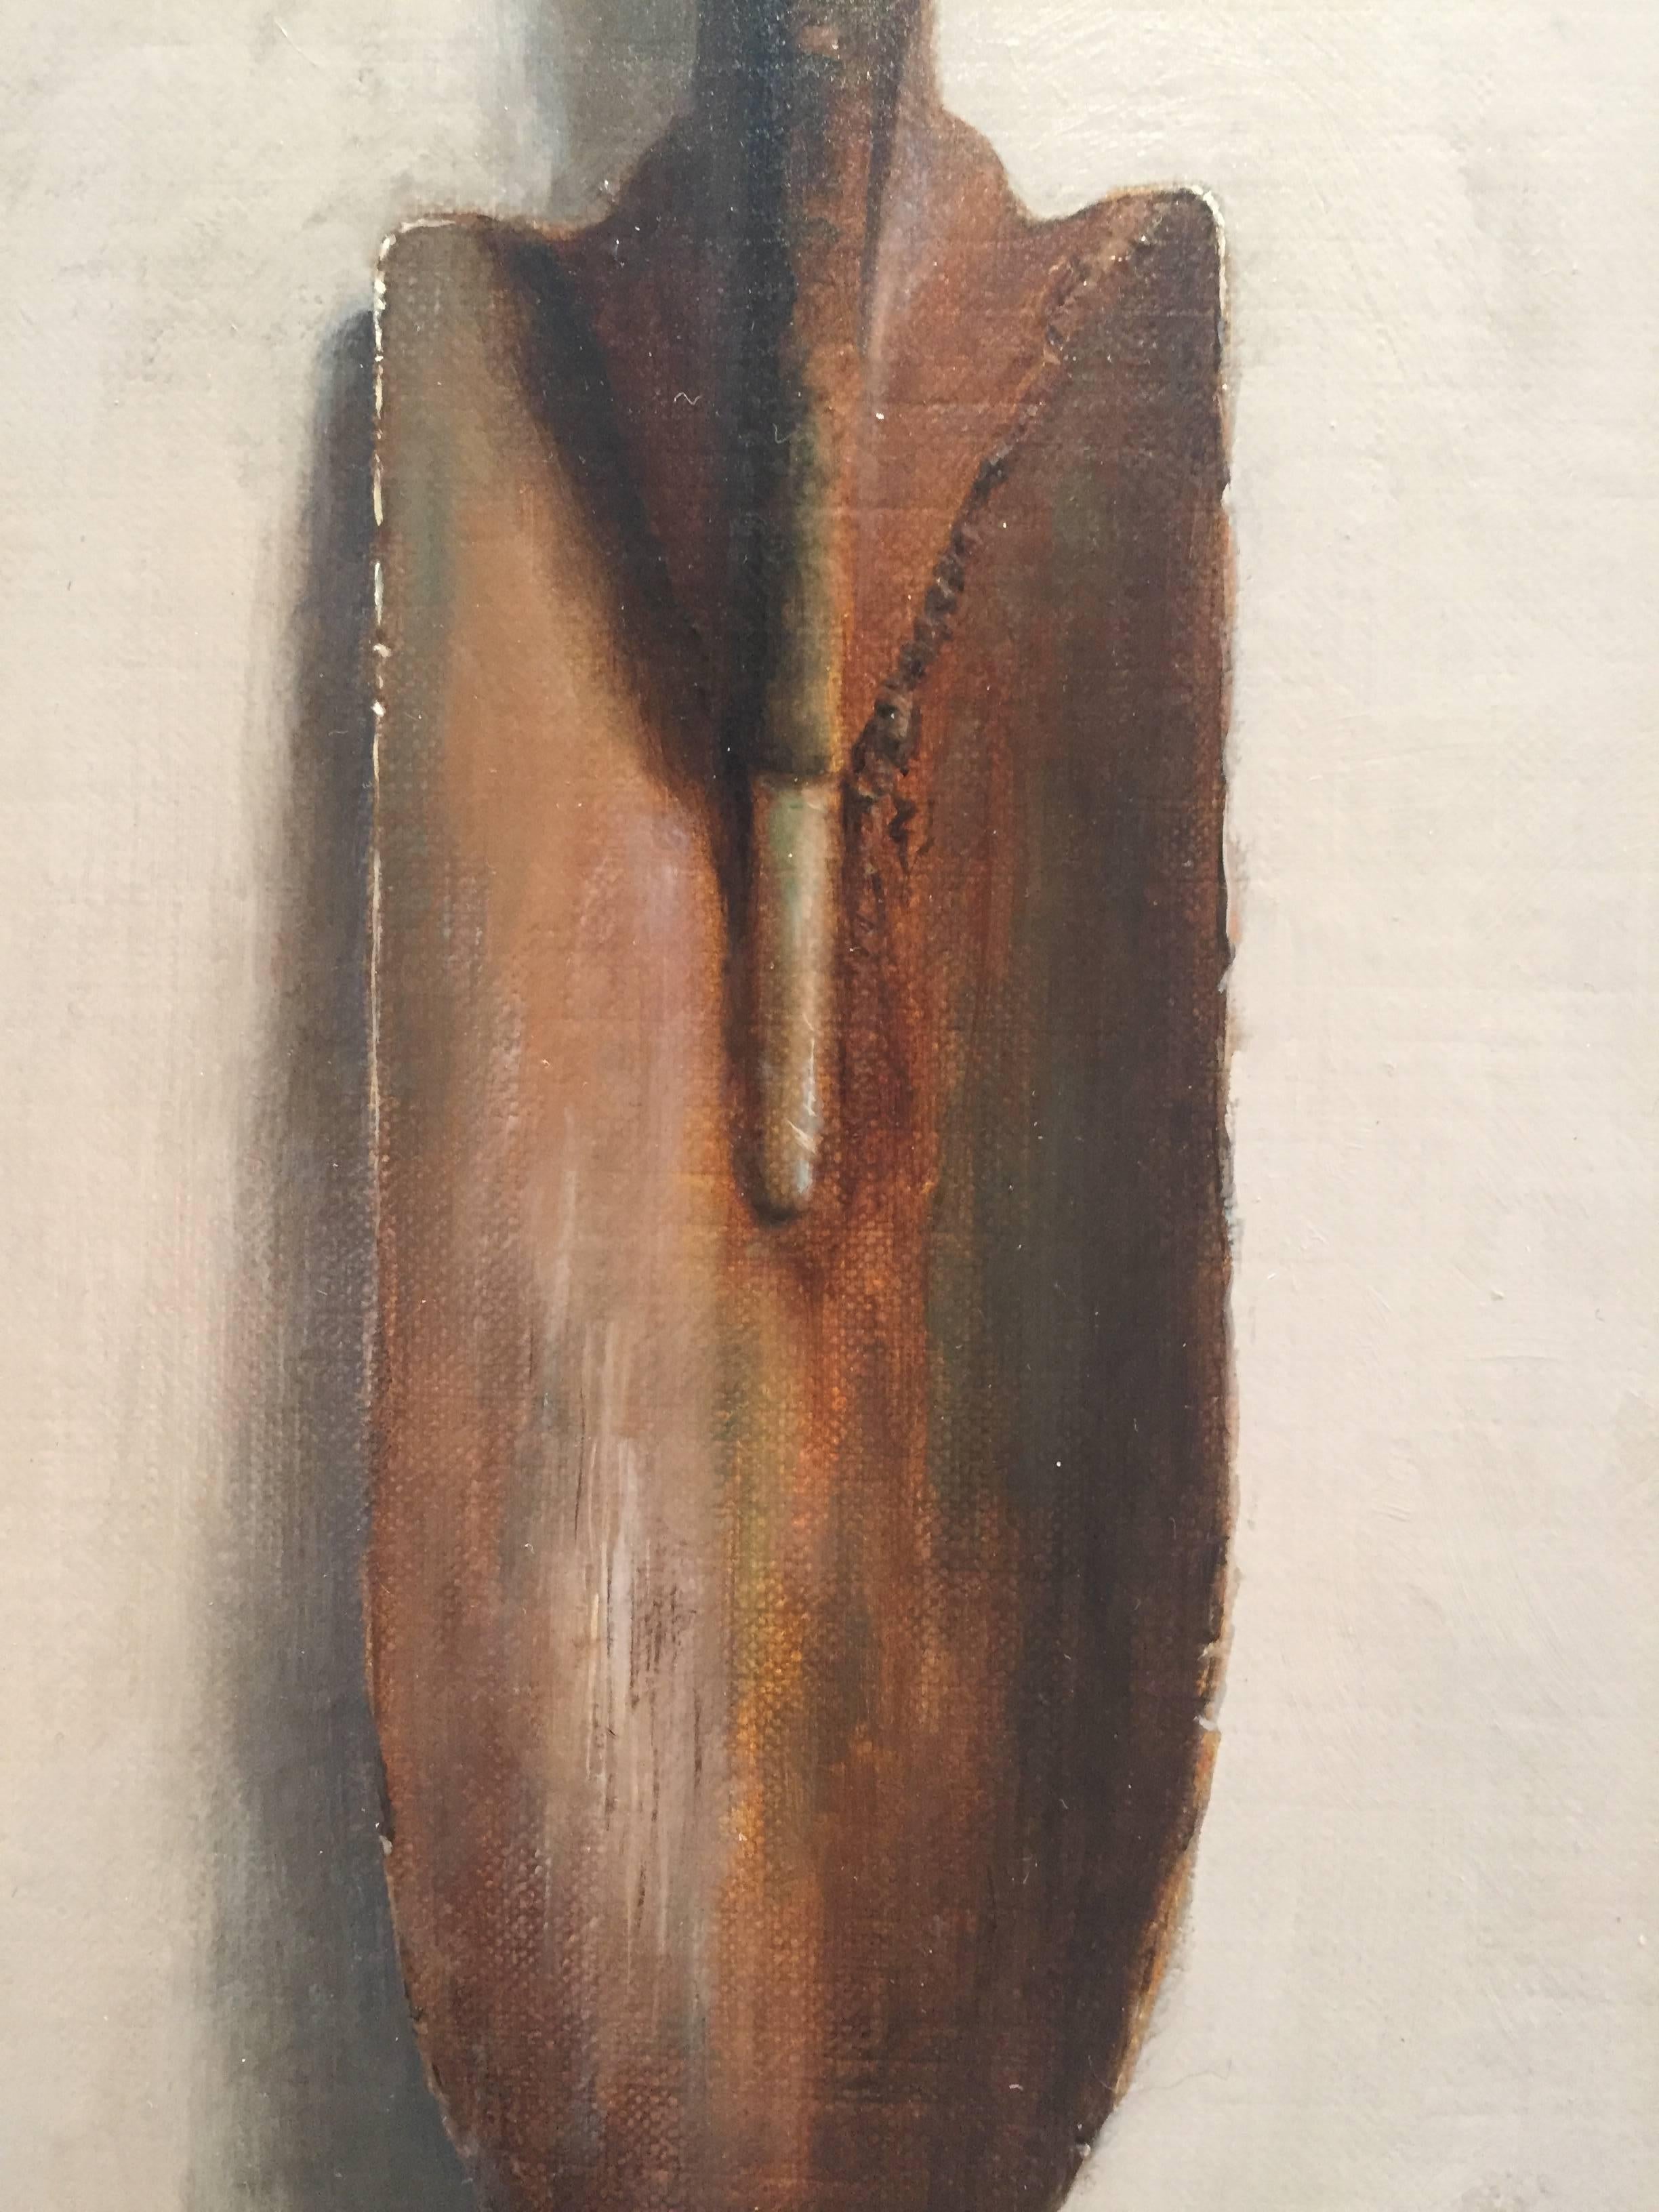 Painted from life, and old gardeners trowel. Hanging between two tiny metal nails, Morfis presents an old shovel on a pedestal, on top of a monochromatic background. 


John Morfis was born in Glen Cove, Long Island in 1976. His humble beginnings